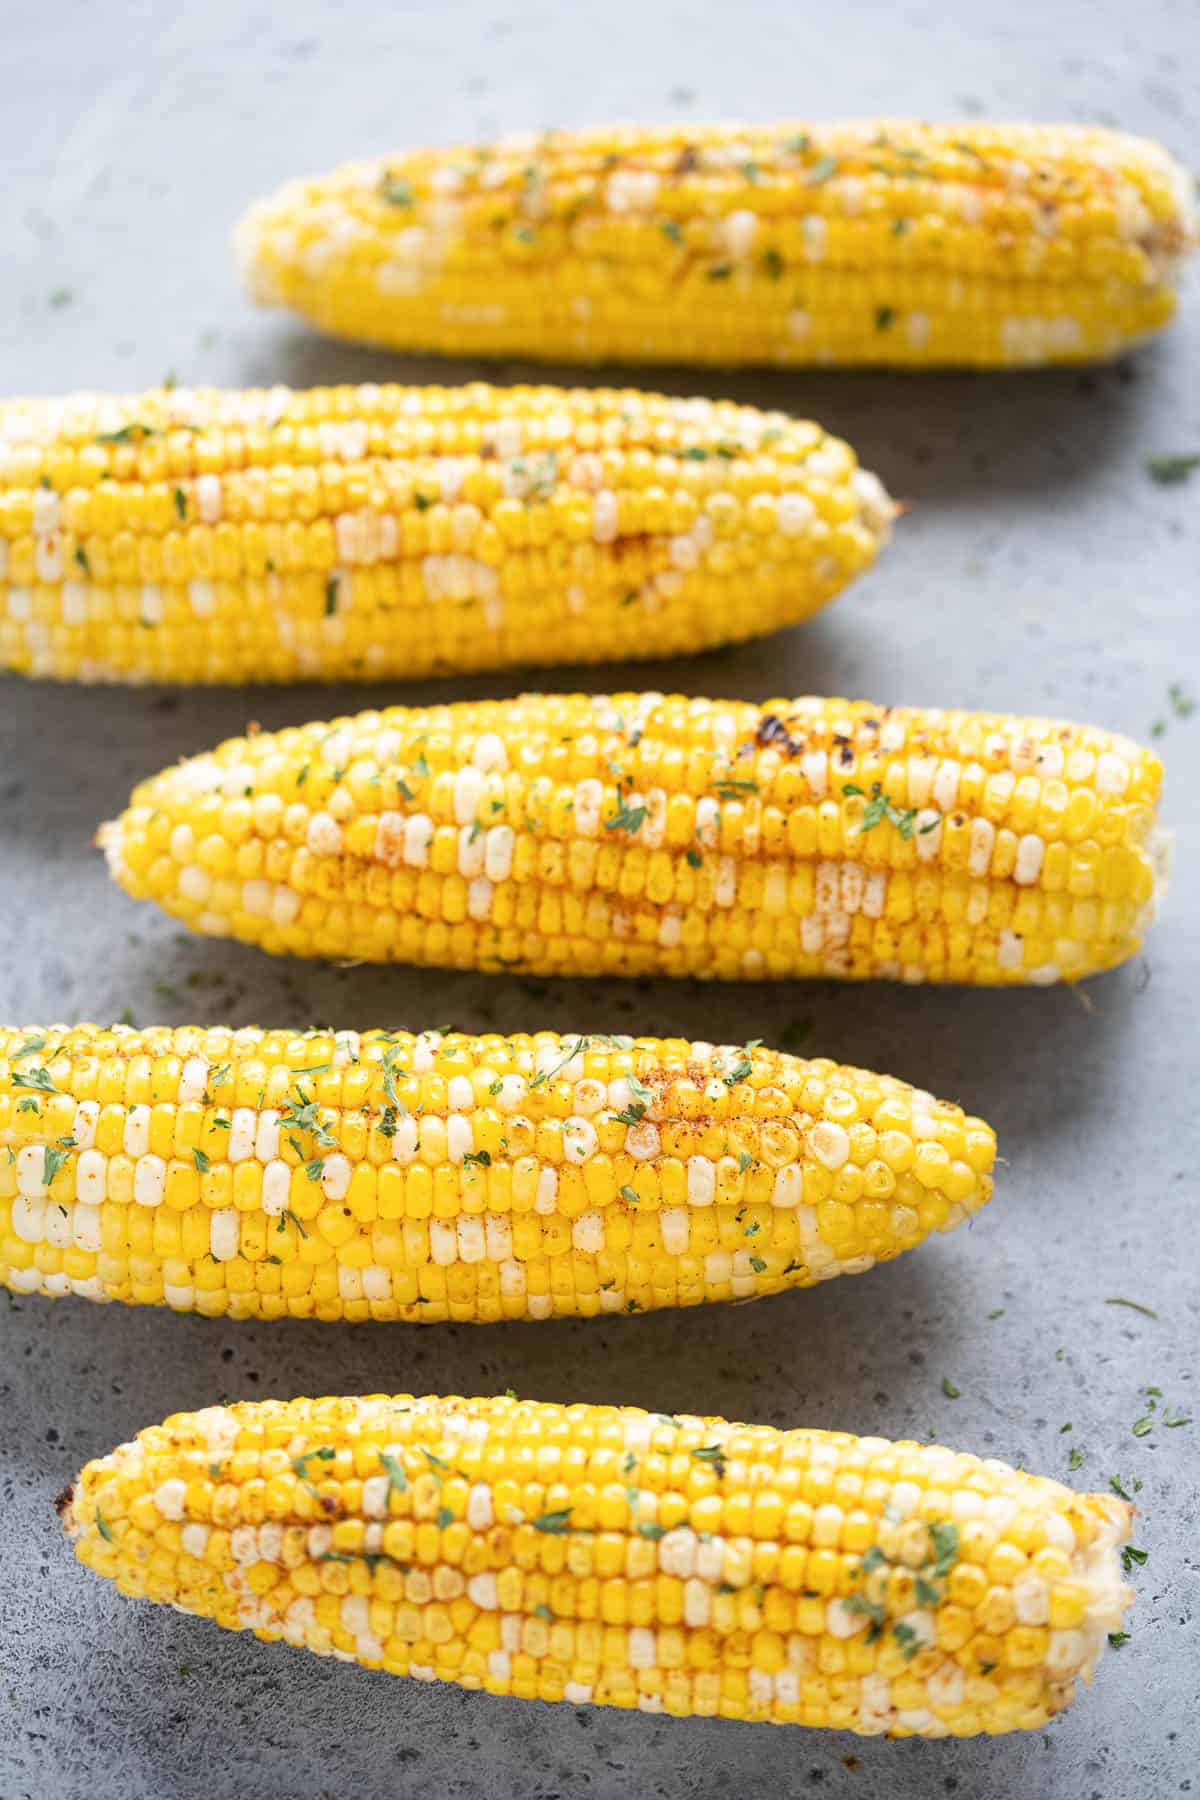 Five ears of grilled corn on the cob arranged in a row.